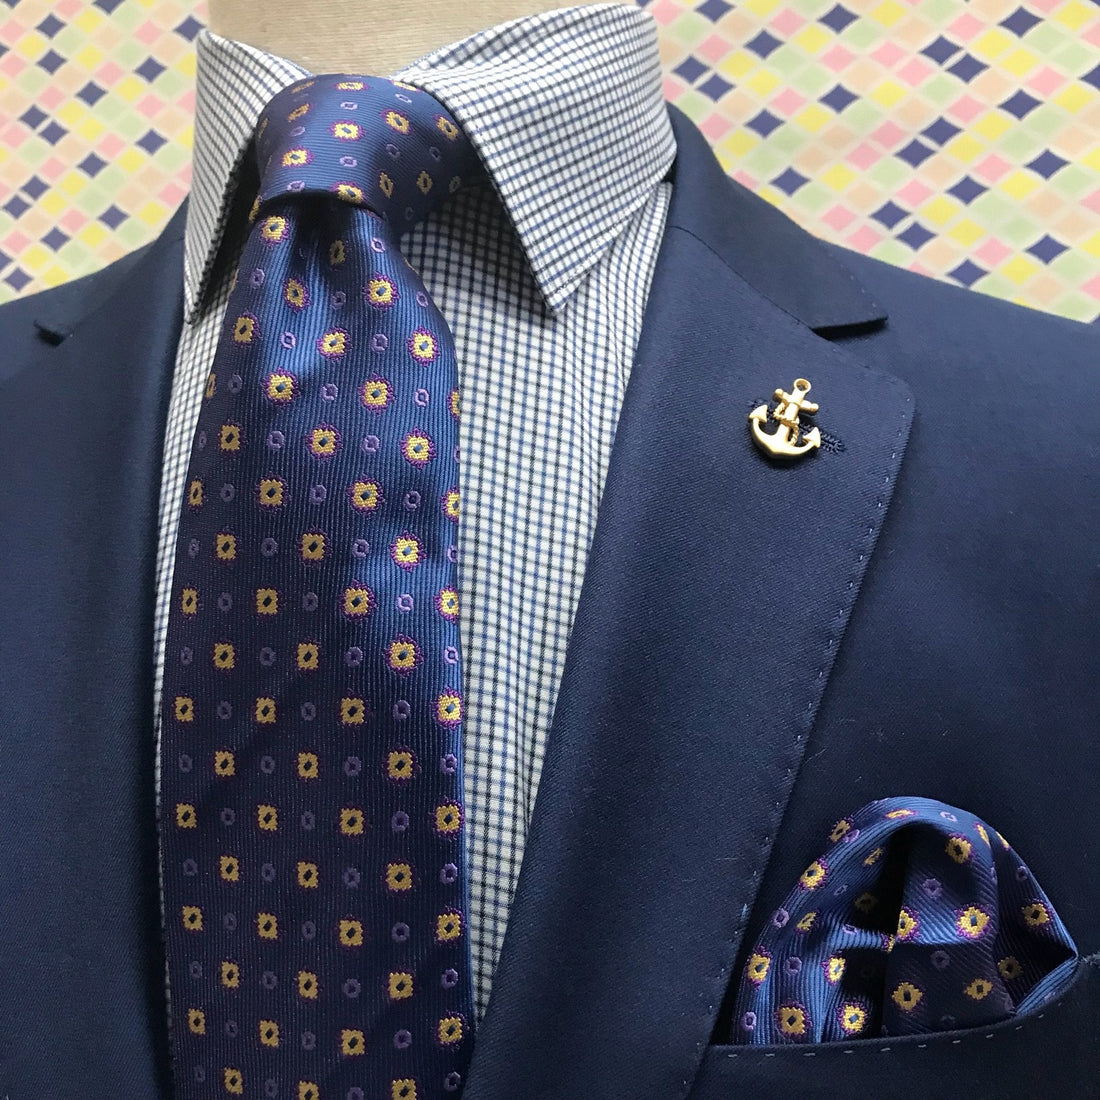 navy blue mini gingham checked mens shirt under a navy blue suit jacket